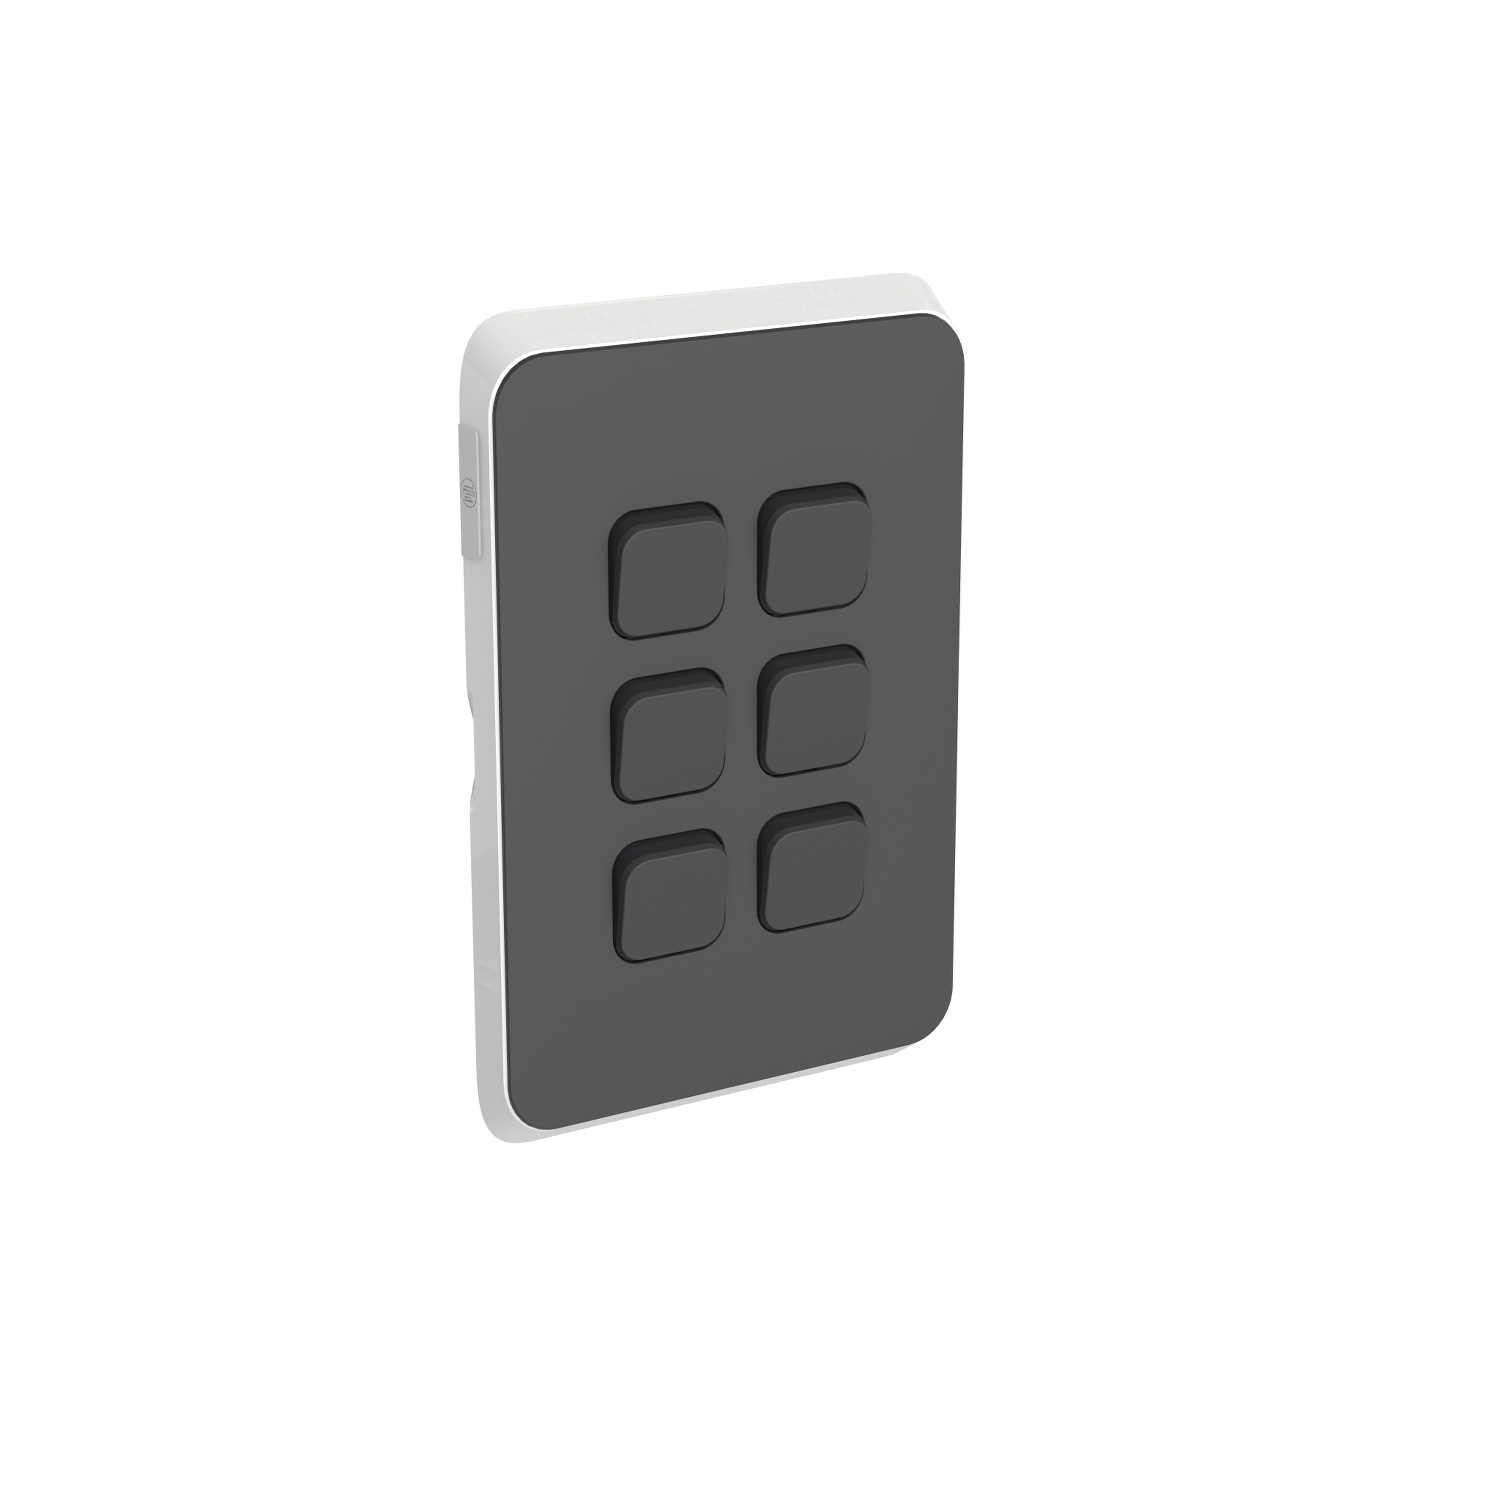 PDL386C-AN - PDL Iconic Cover Plate Switch 6Gang - Anthracite